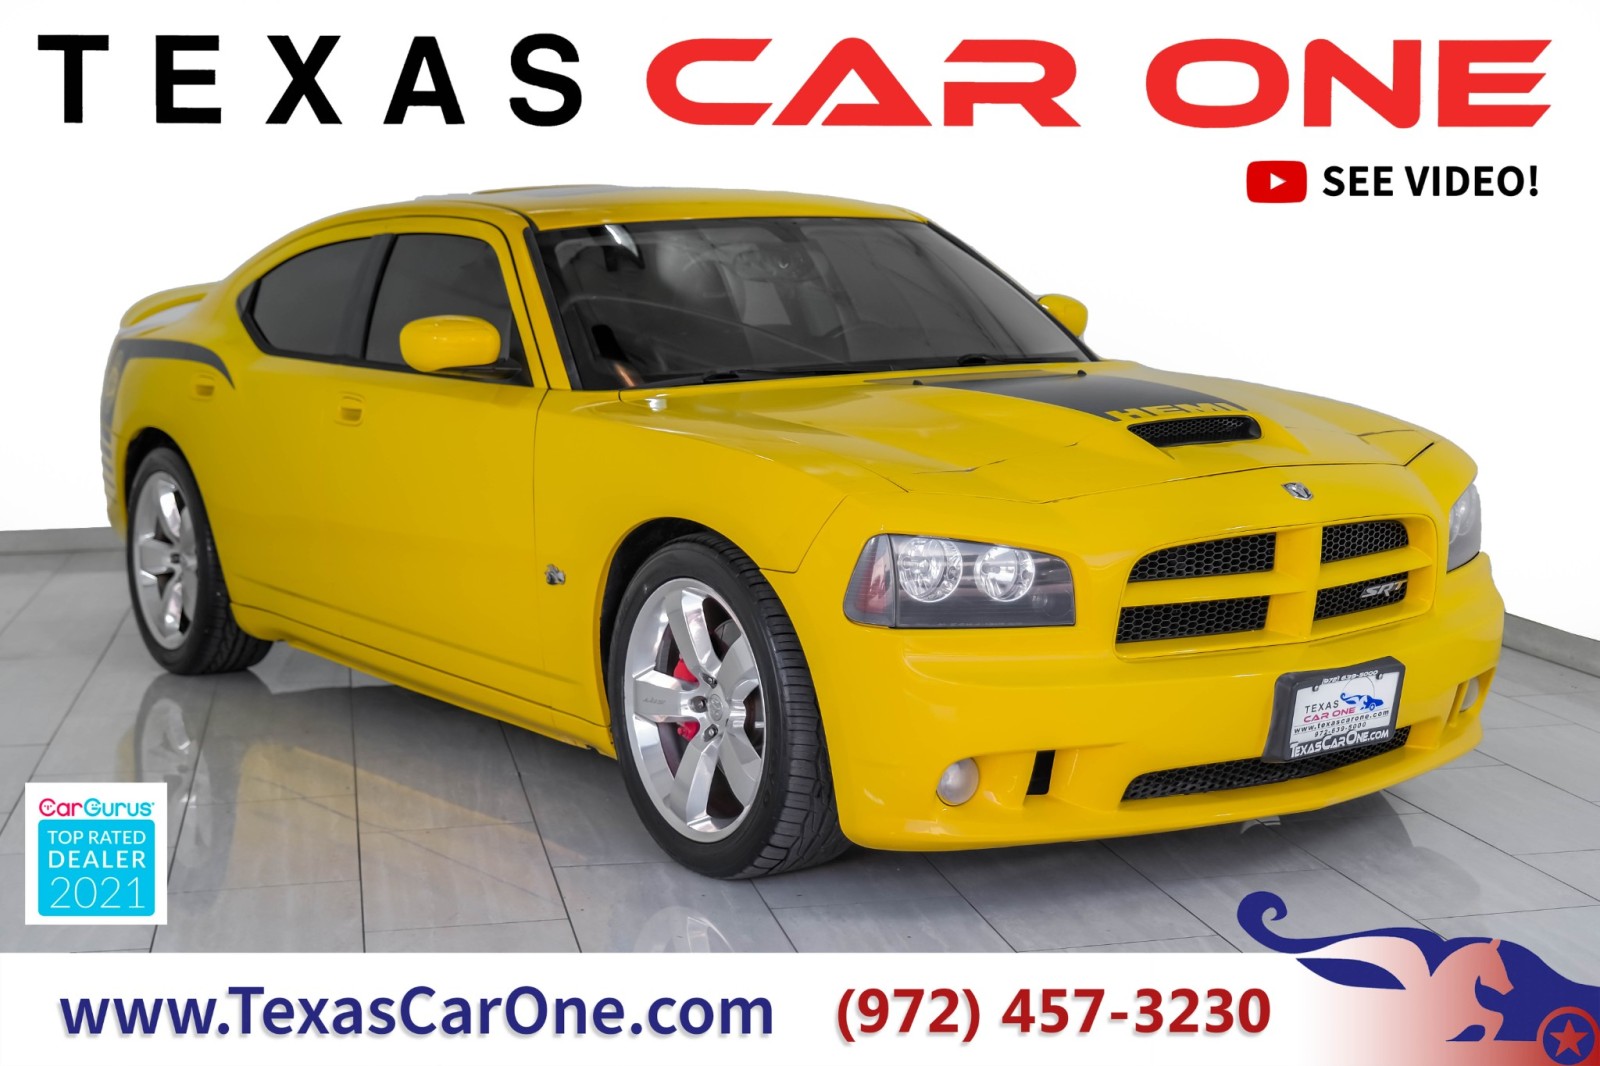 2007 Dodge Charger SRT8 61.L HEMI AUTOMATIC SUNROOF LEATHER/SUEDE HEA 1